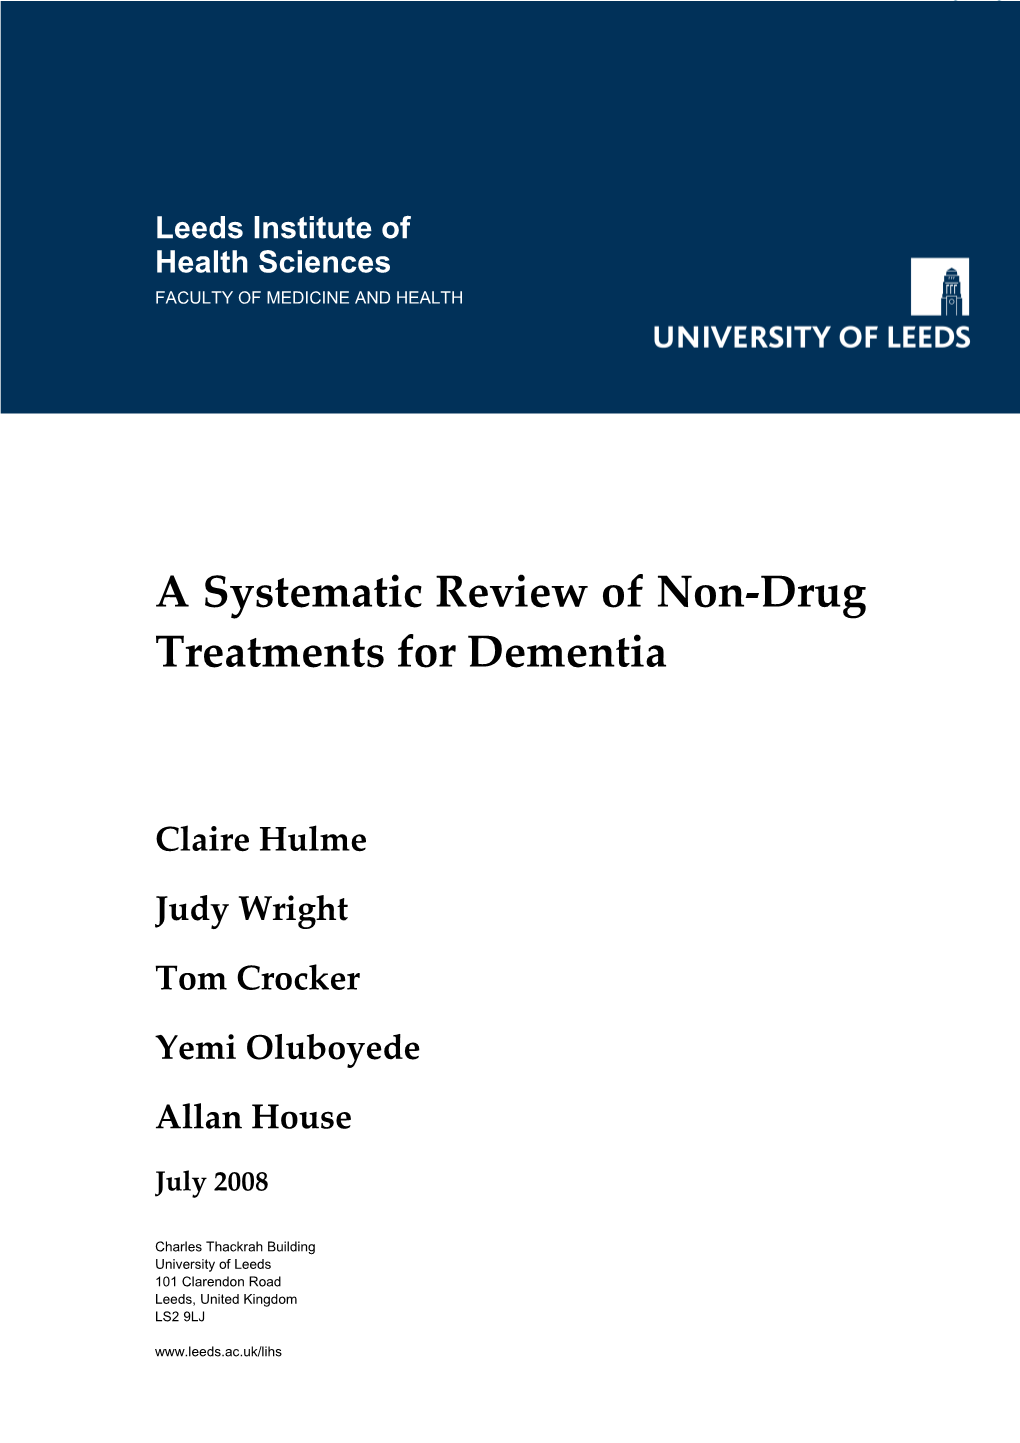 A Systematic Review of Non-Drug Treatments for Dementia